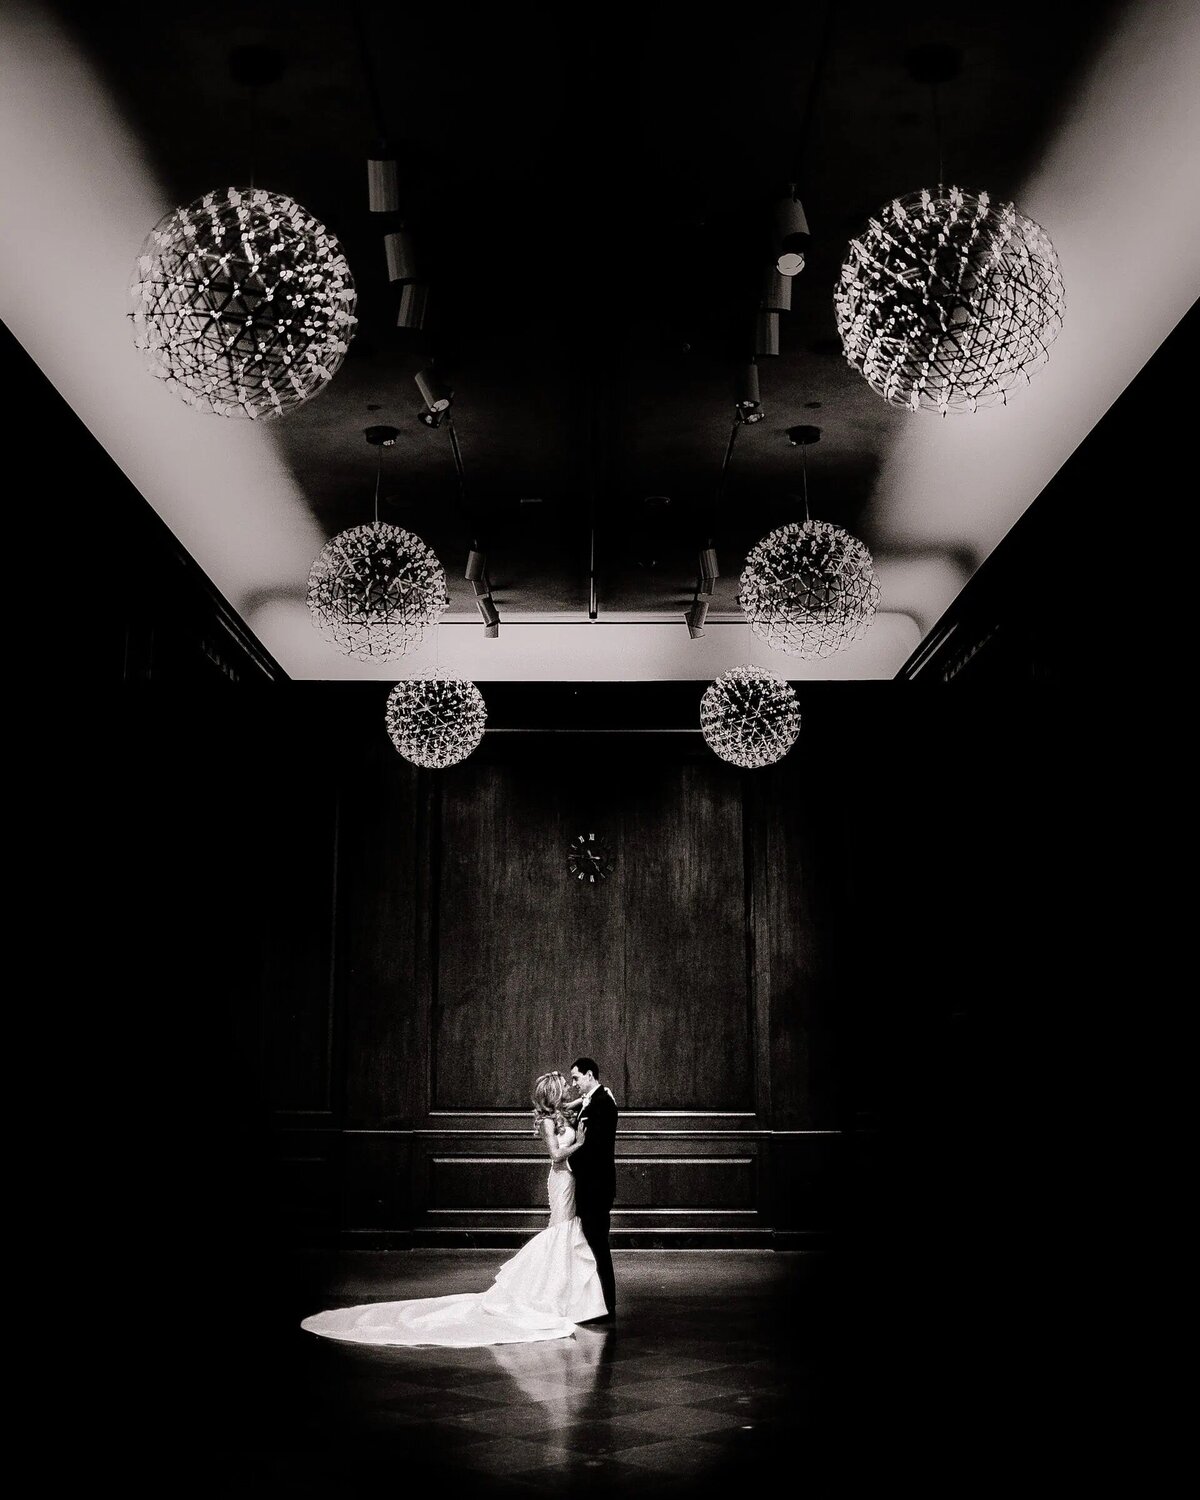 A couple stands embraced in the spotlight, surrounded by darkness and the grandeur of ornate chandeliers above.